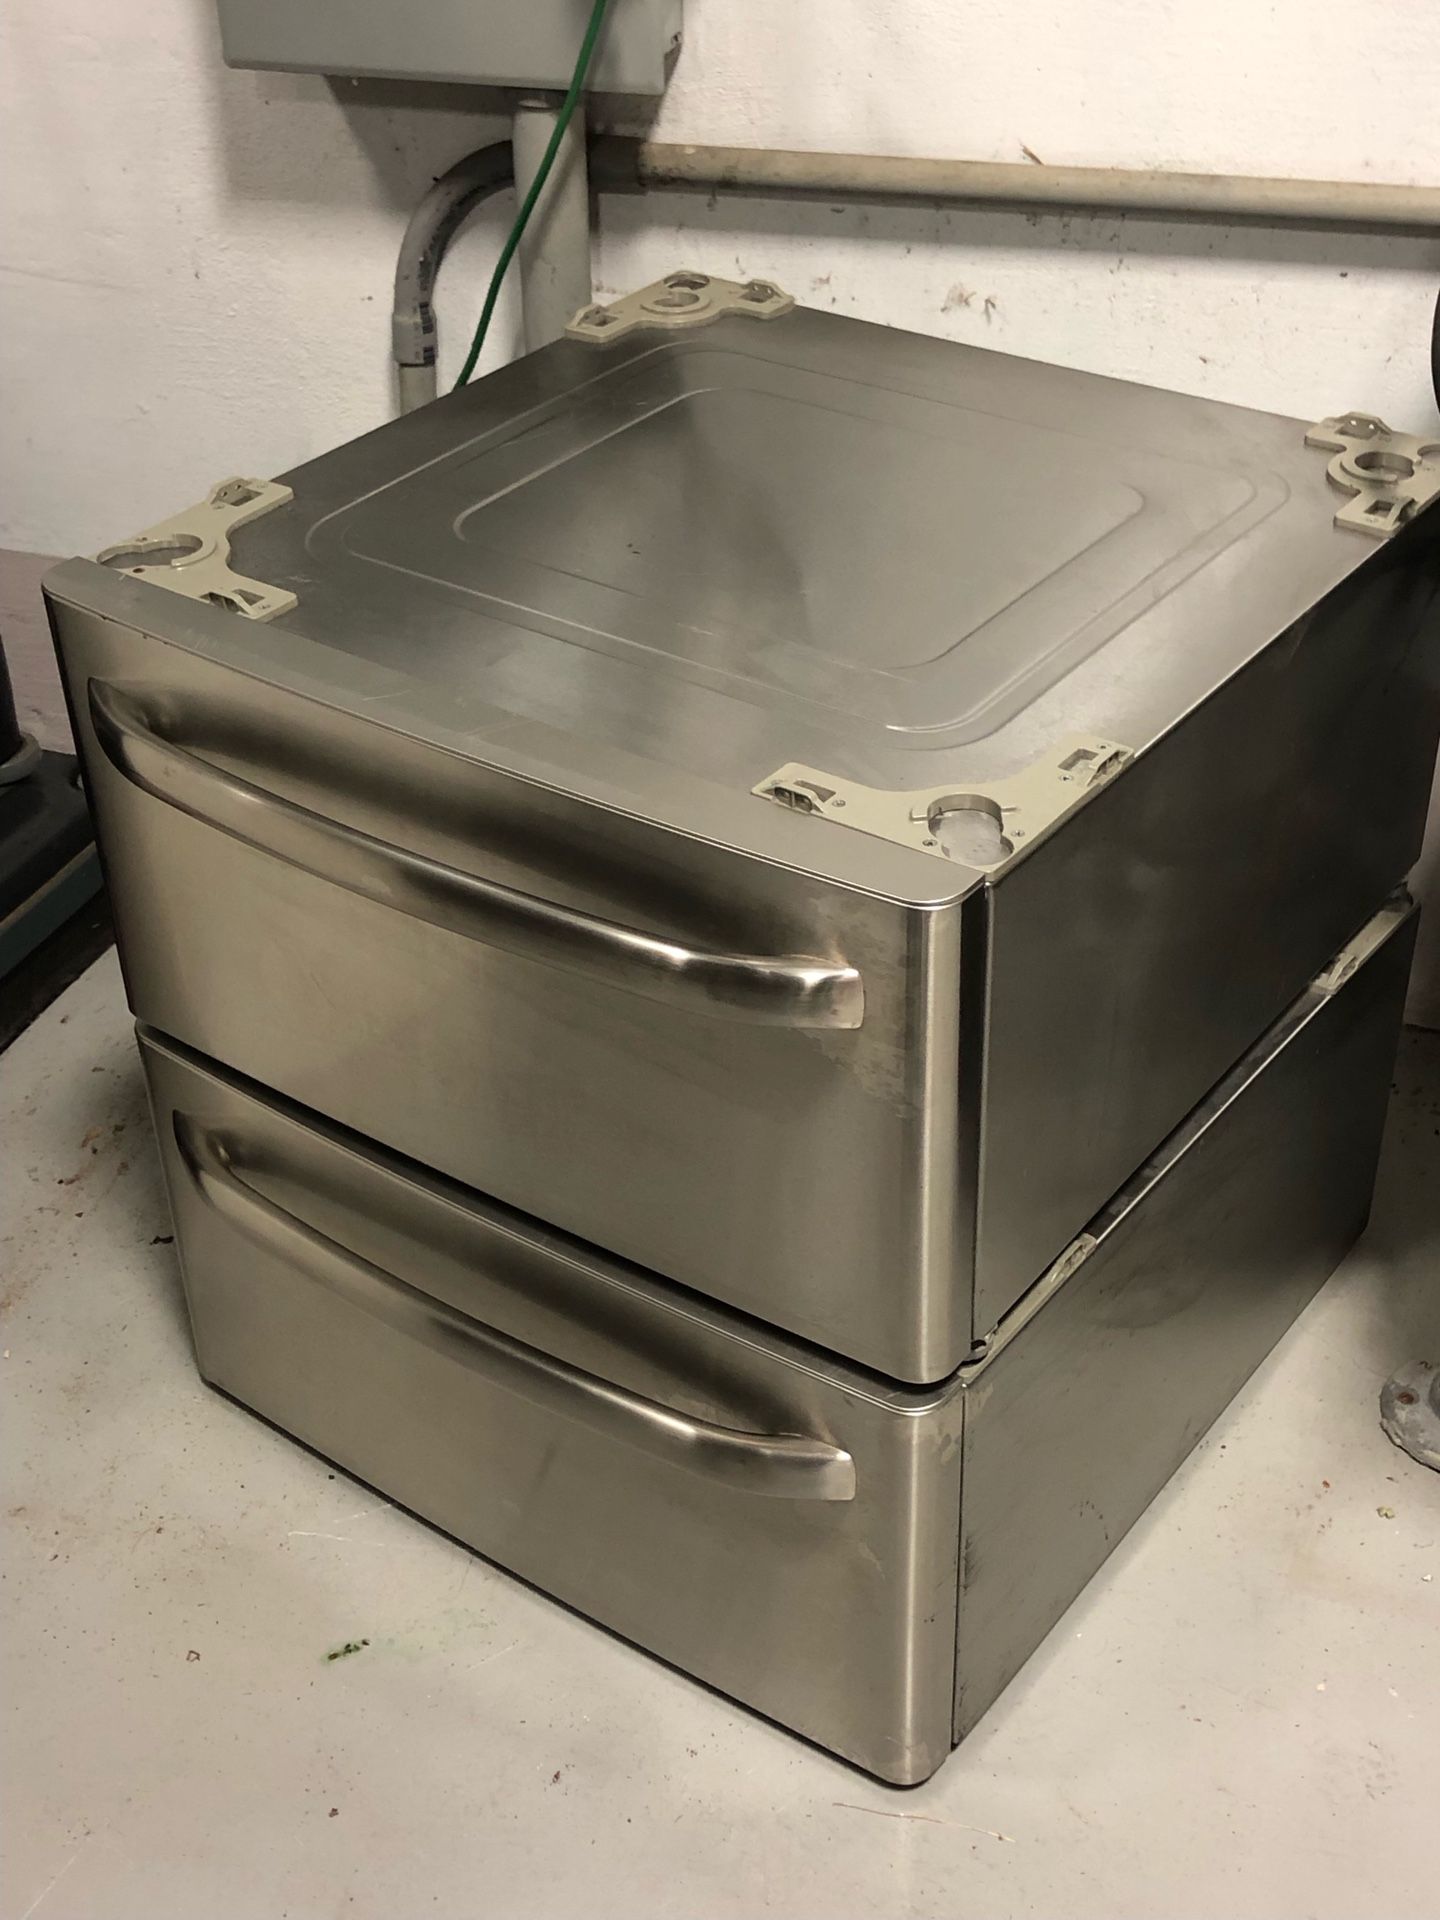 Pair of Stainless Steel Washer & Dryer Drawers